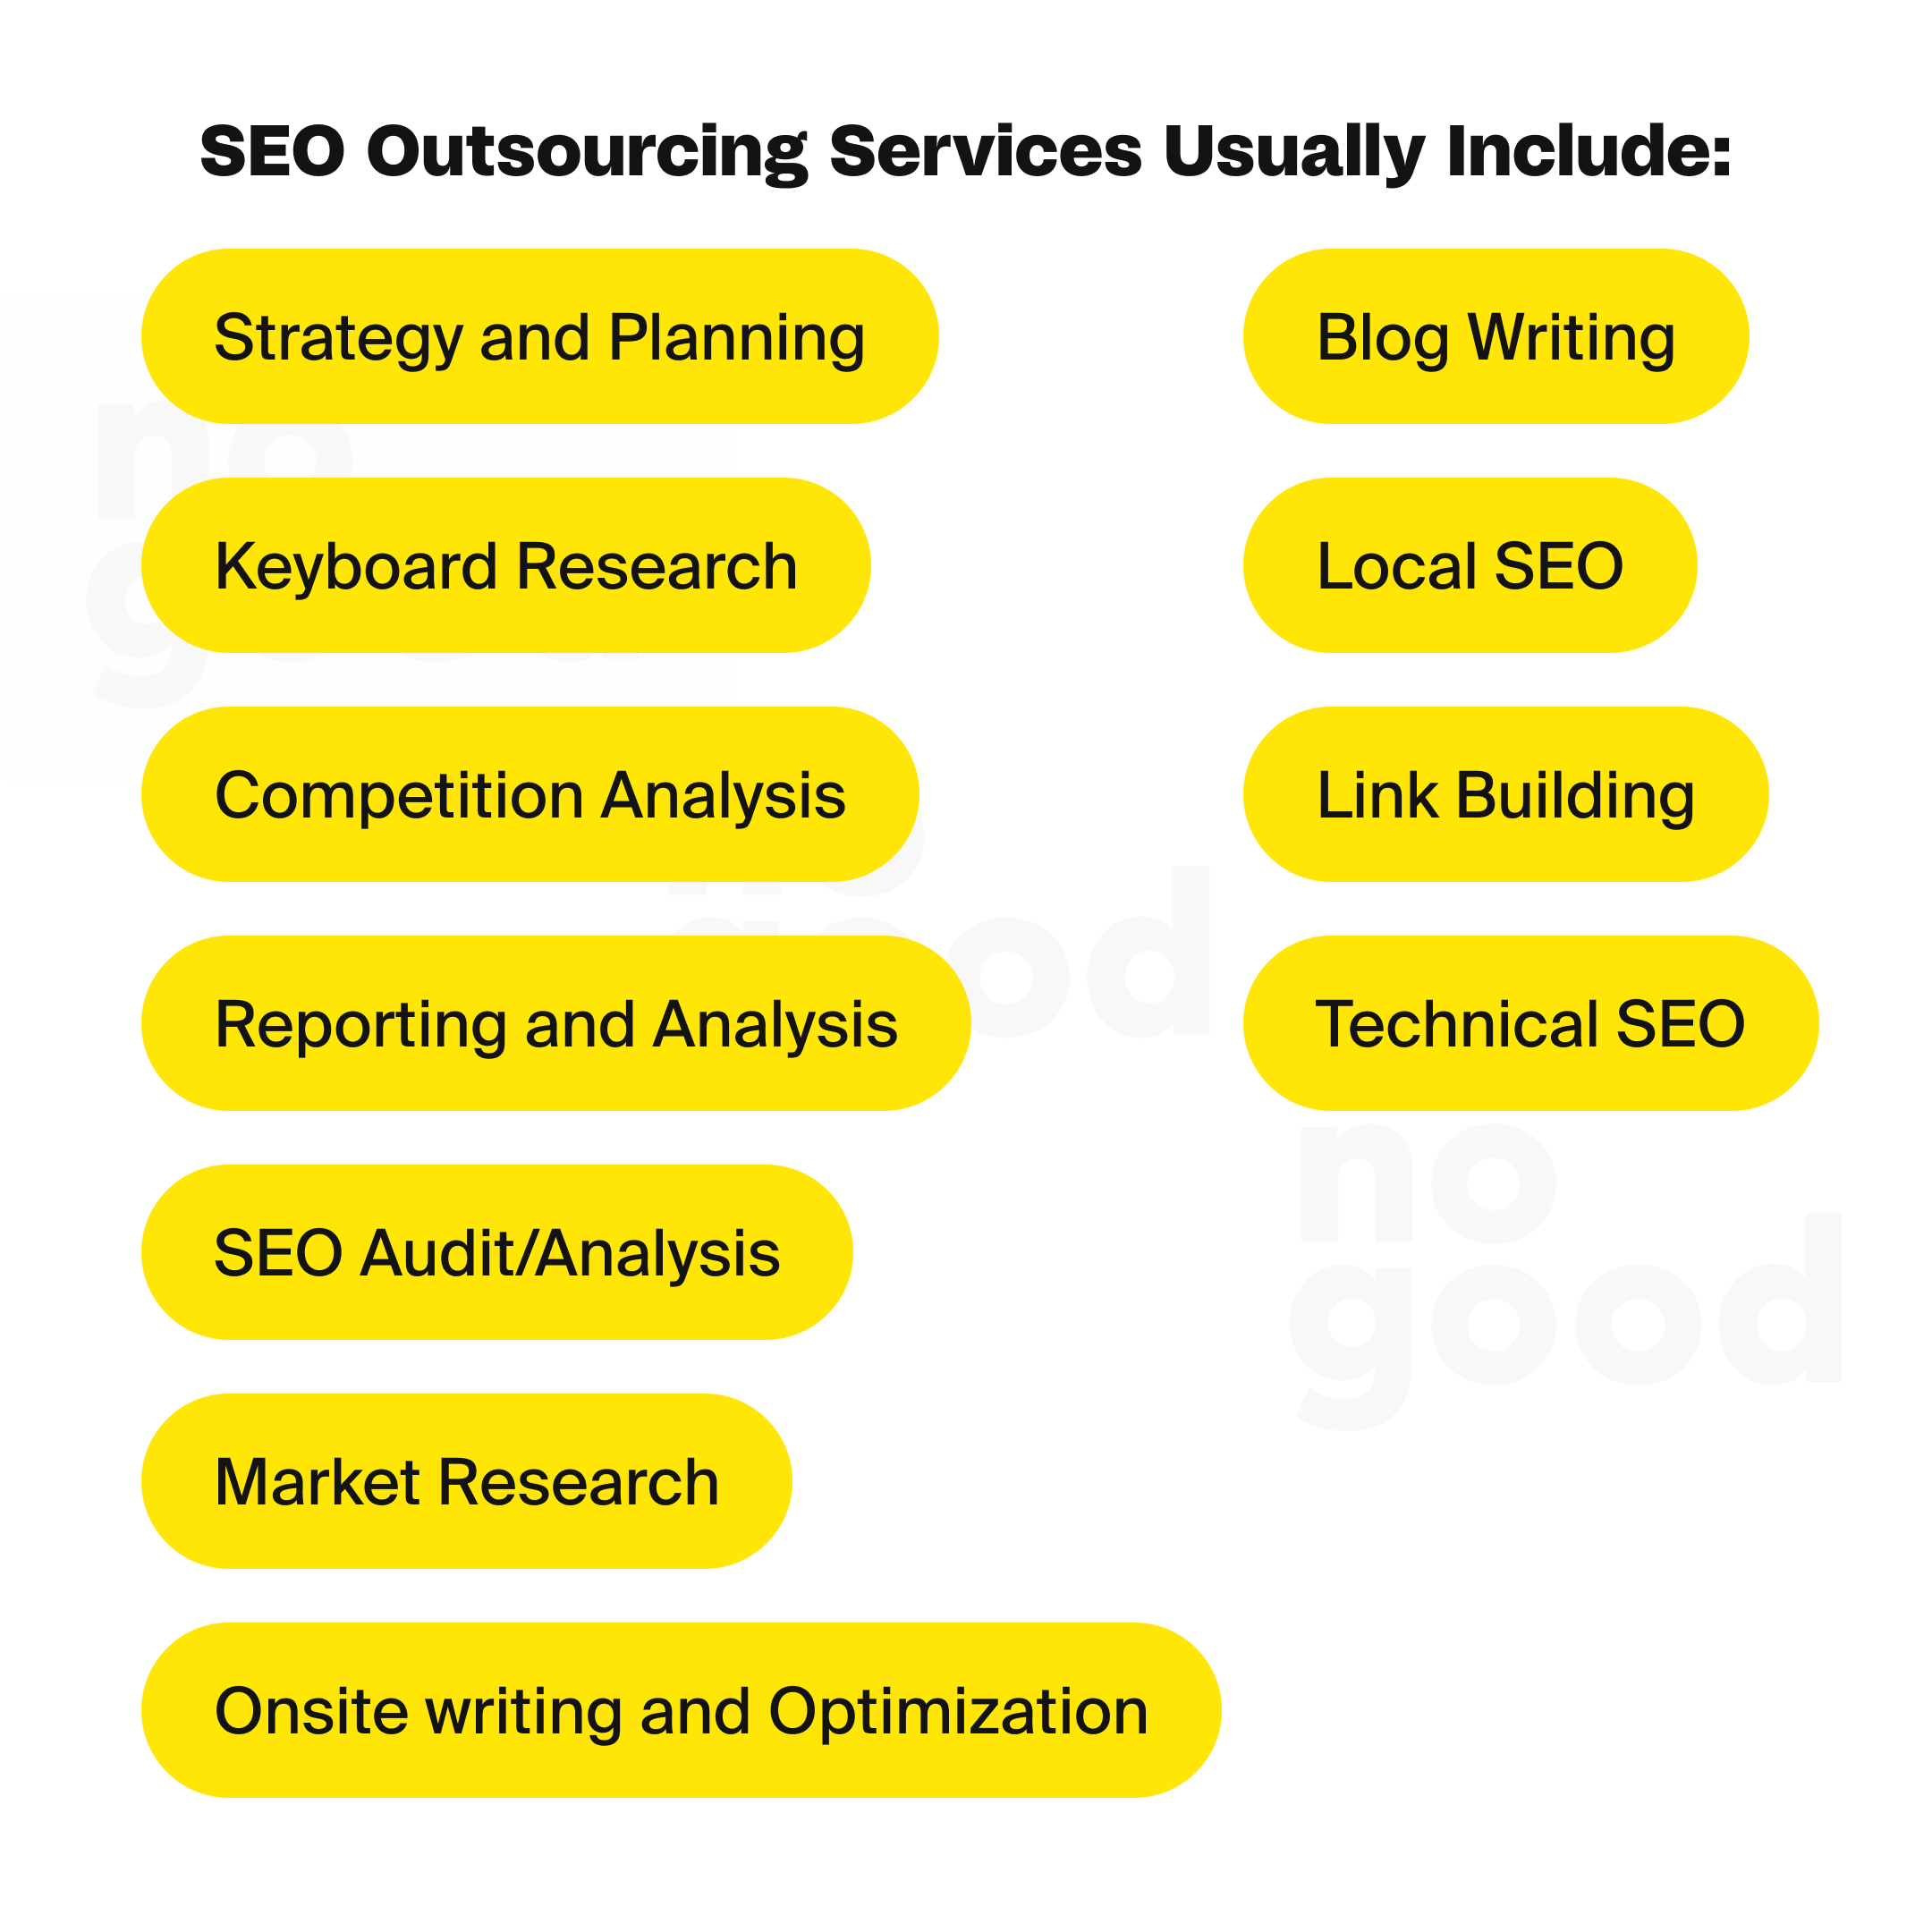 Types of SEO outsourcing services